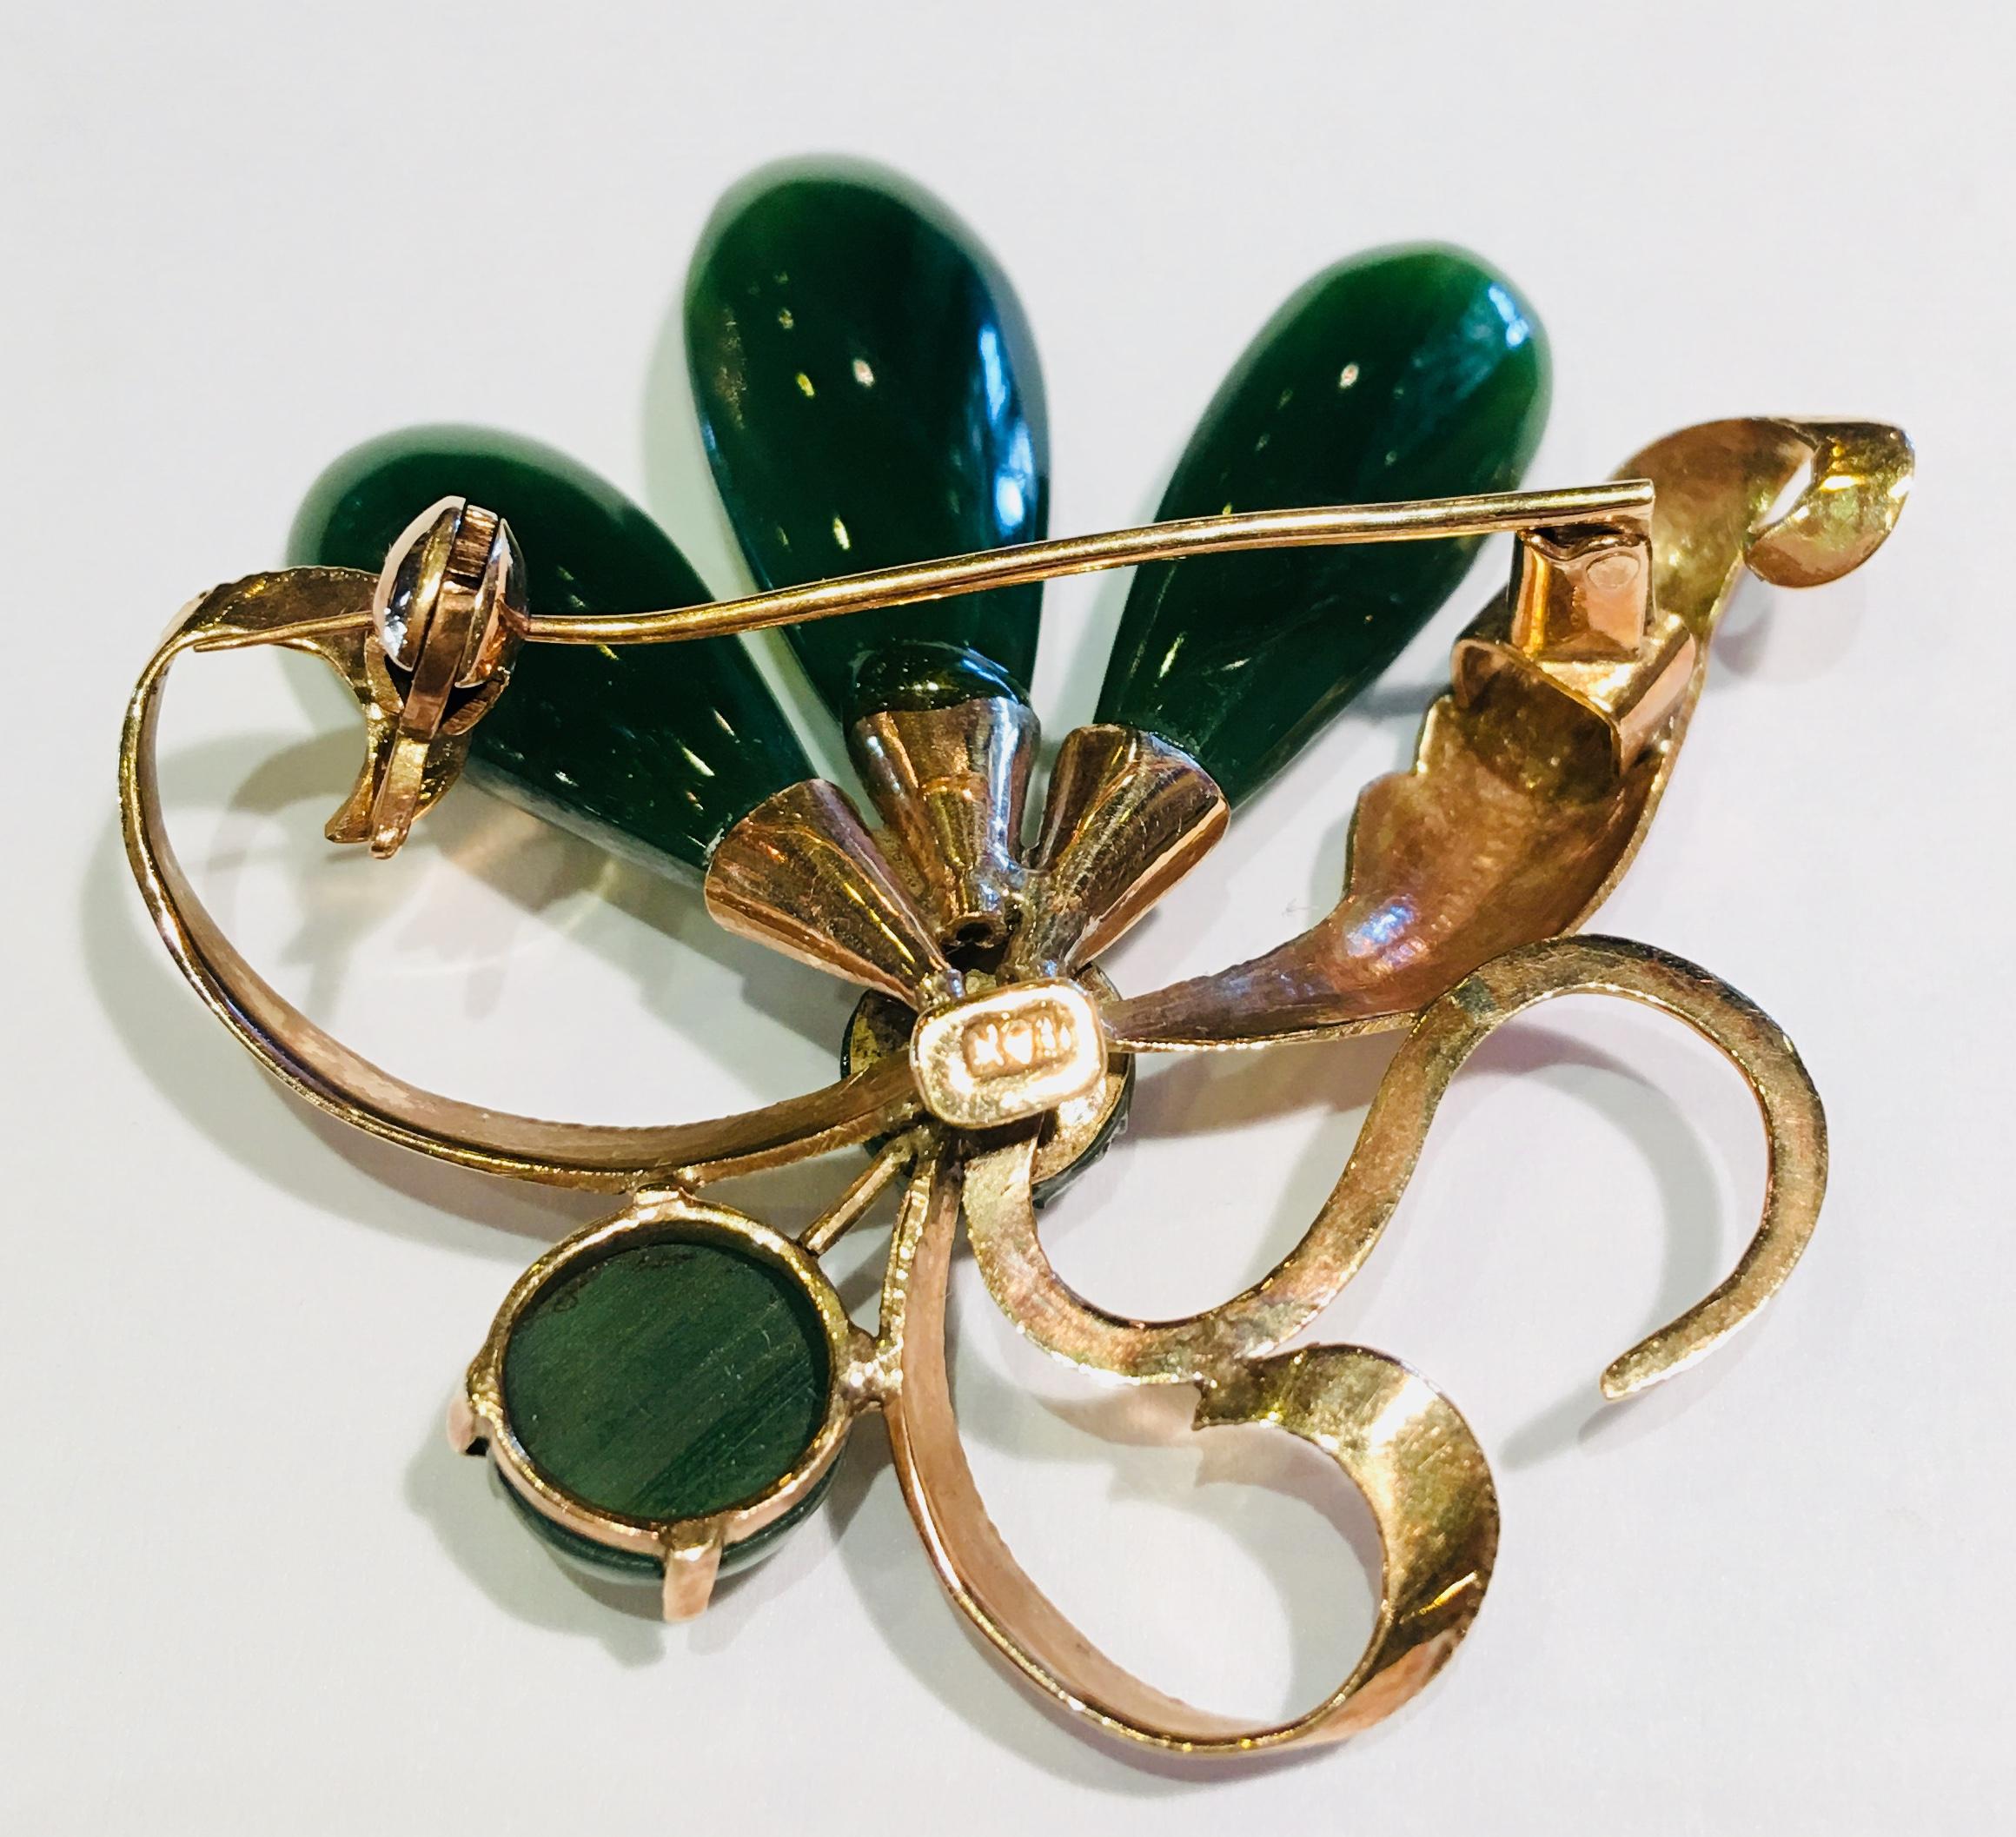 Lovely vintage brooch pin from the 1950s features 2 round green jade pieces and 3 teardrop shaped green jade pieces to form an abstract flower, set in 18 karat rose gold and accented by a long, curling etched leaf and 3 similar abstract